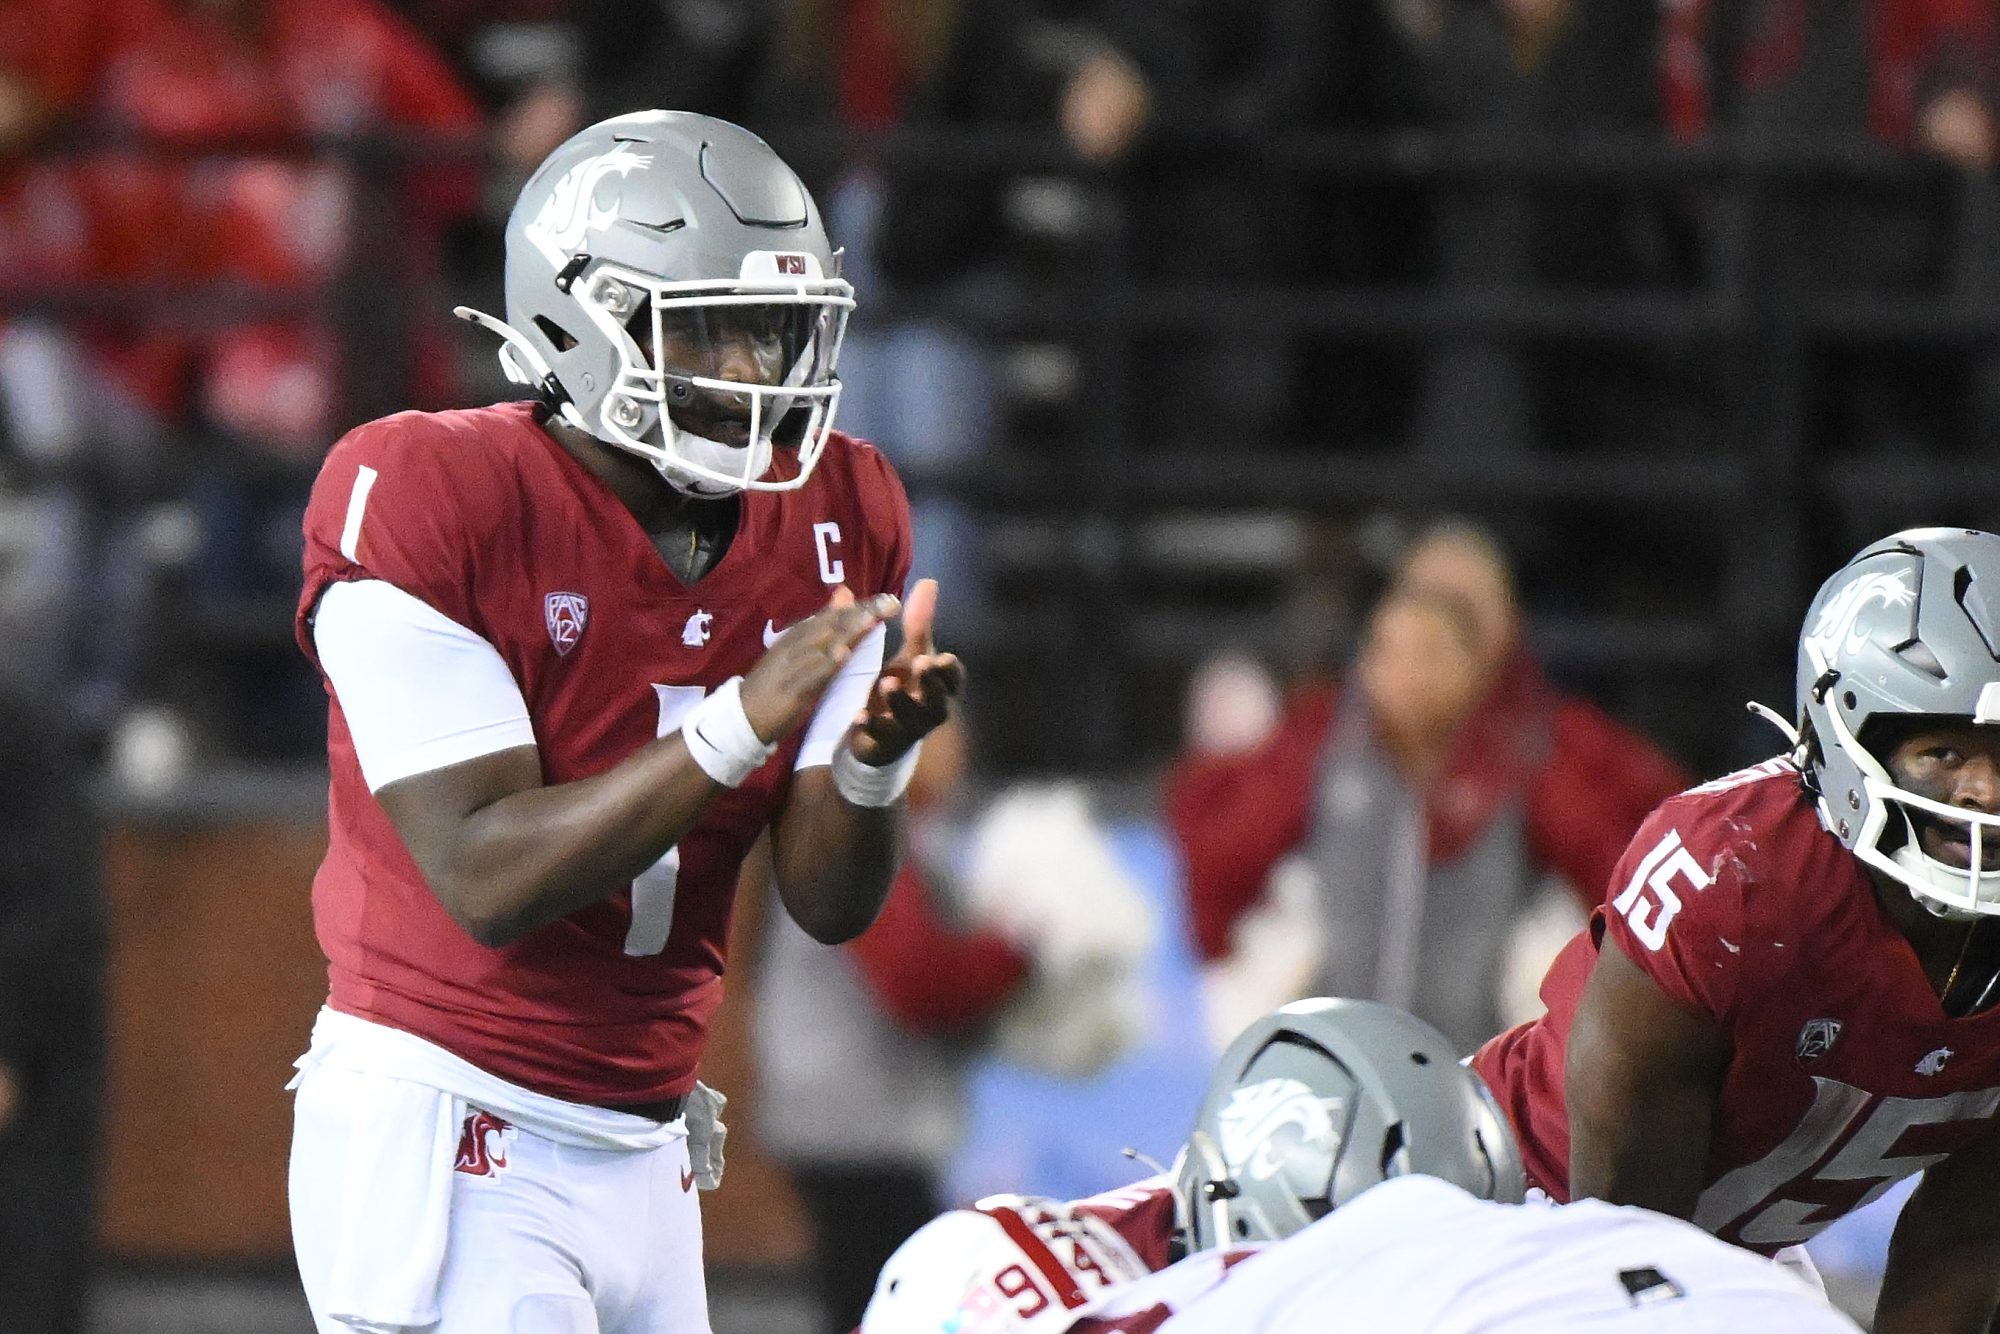 Washington State and Oregon State participated in a hearing on Tuesday against the Pac-12.